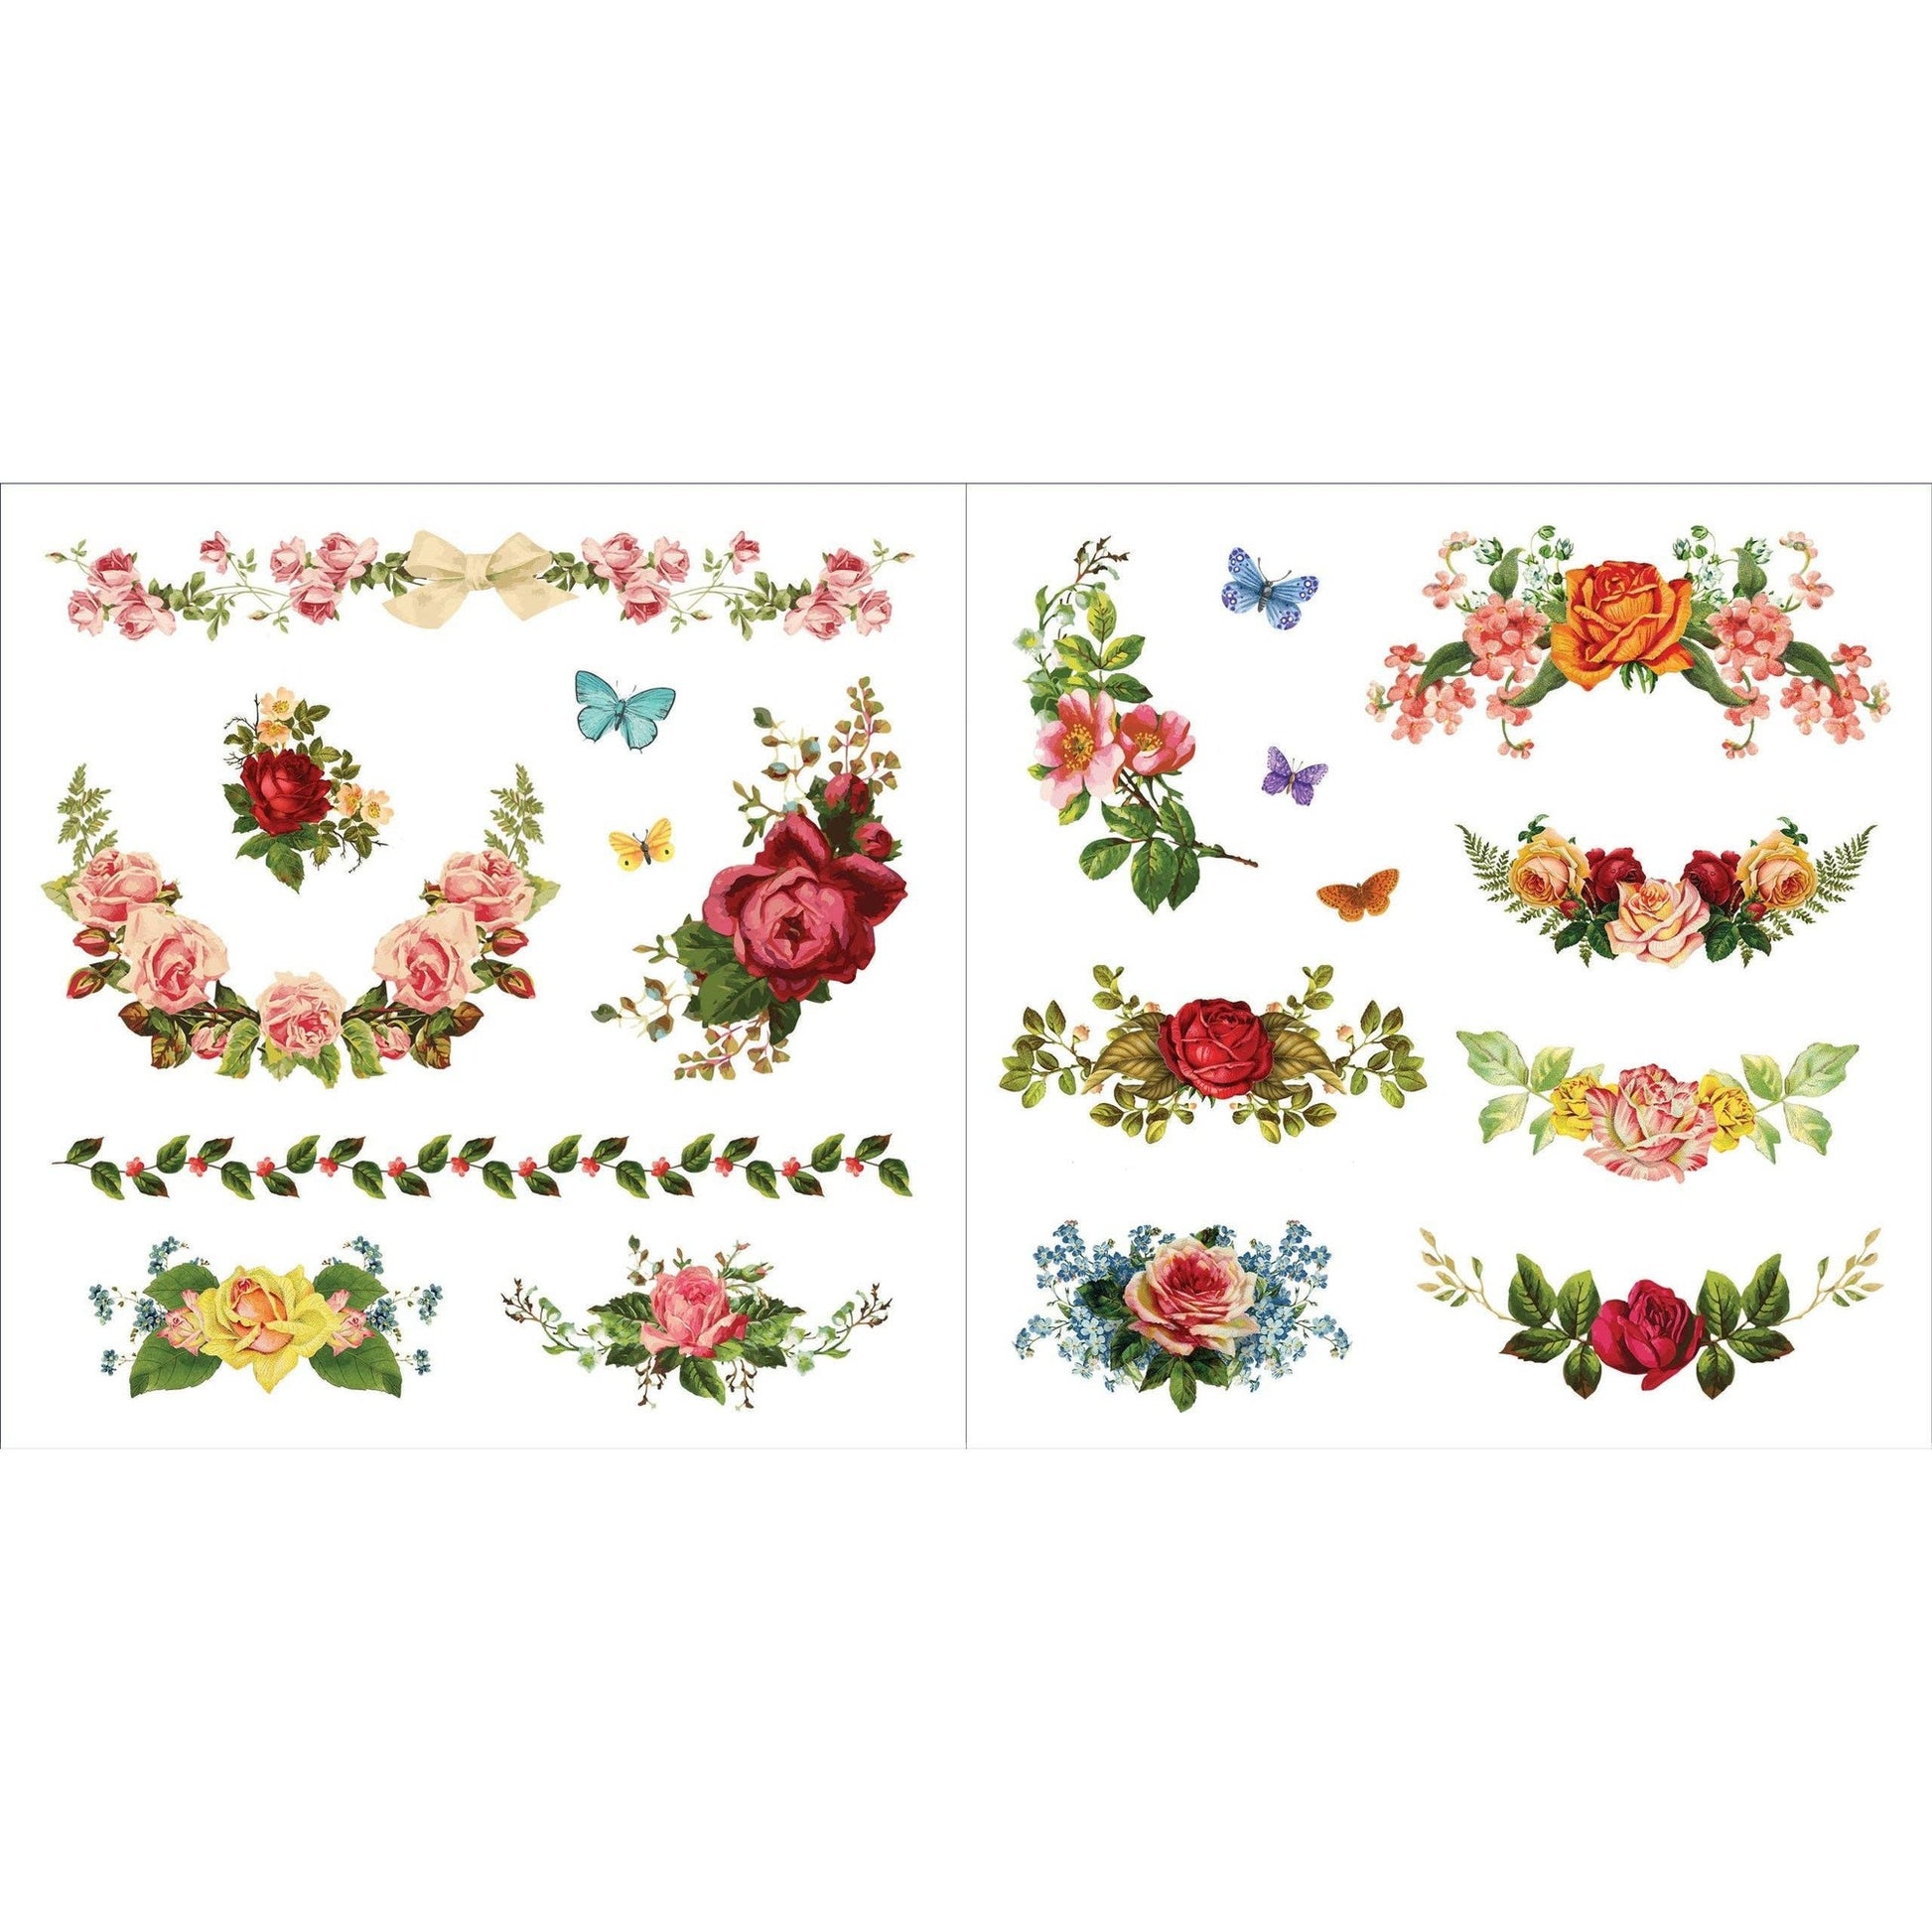 Bunches of Botanicals Decorative Stickers | A Blooming Sticker Book | Over 500 Decals